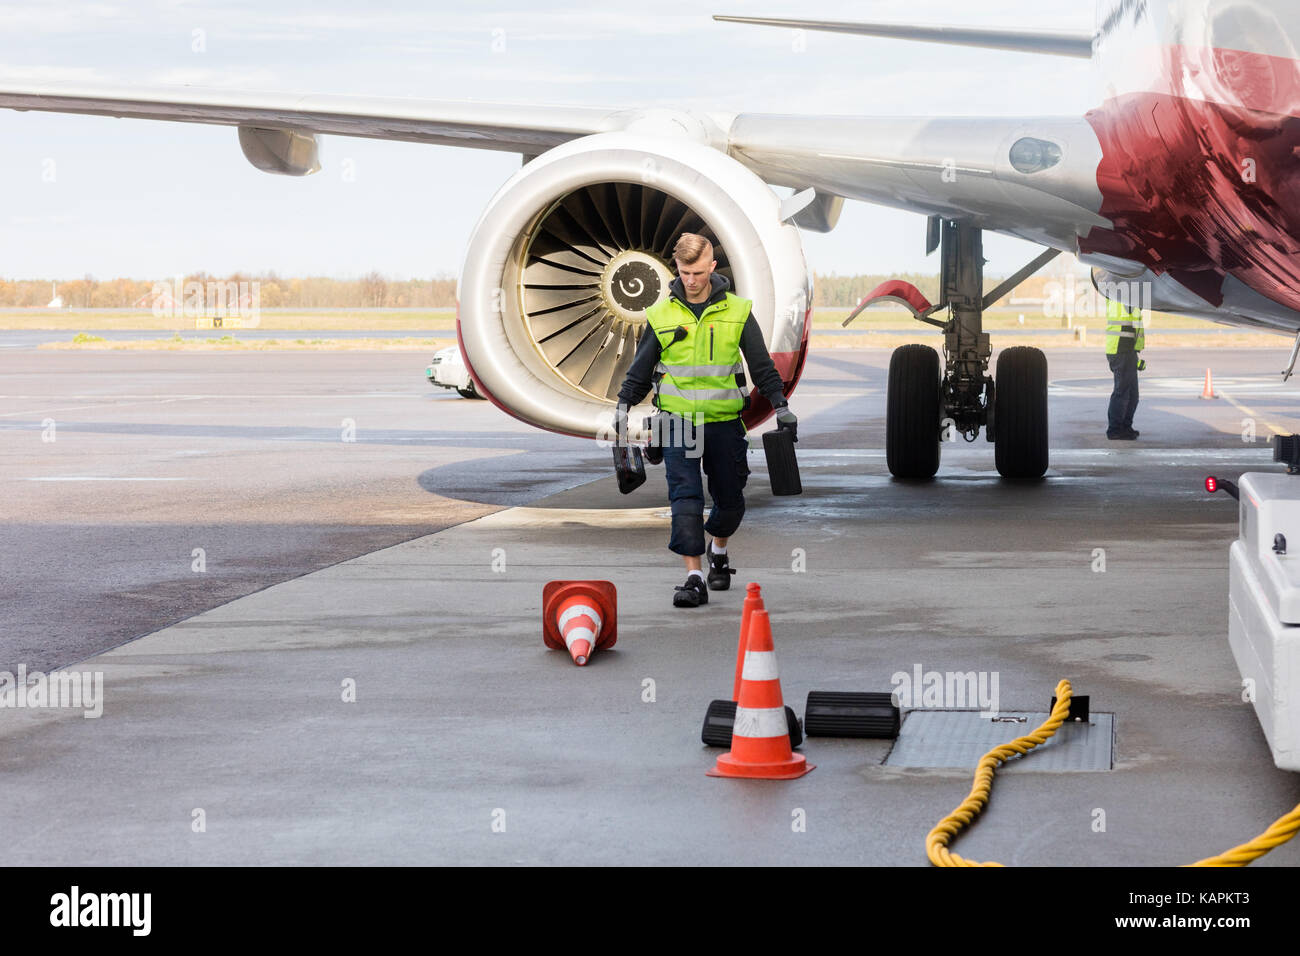 Worker Carrying Chocks By Airplane On Wet Runway Stock Photo